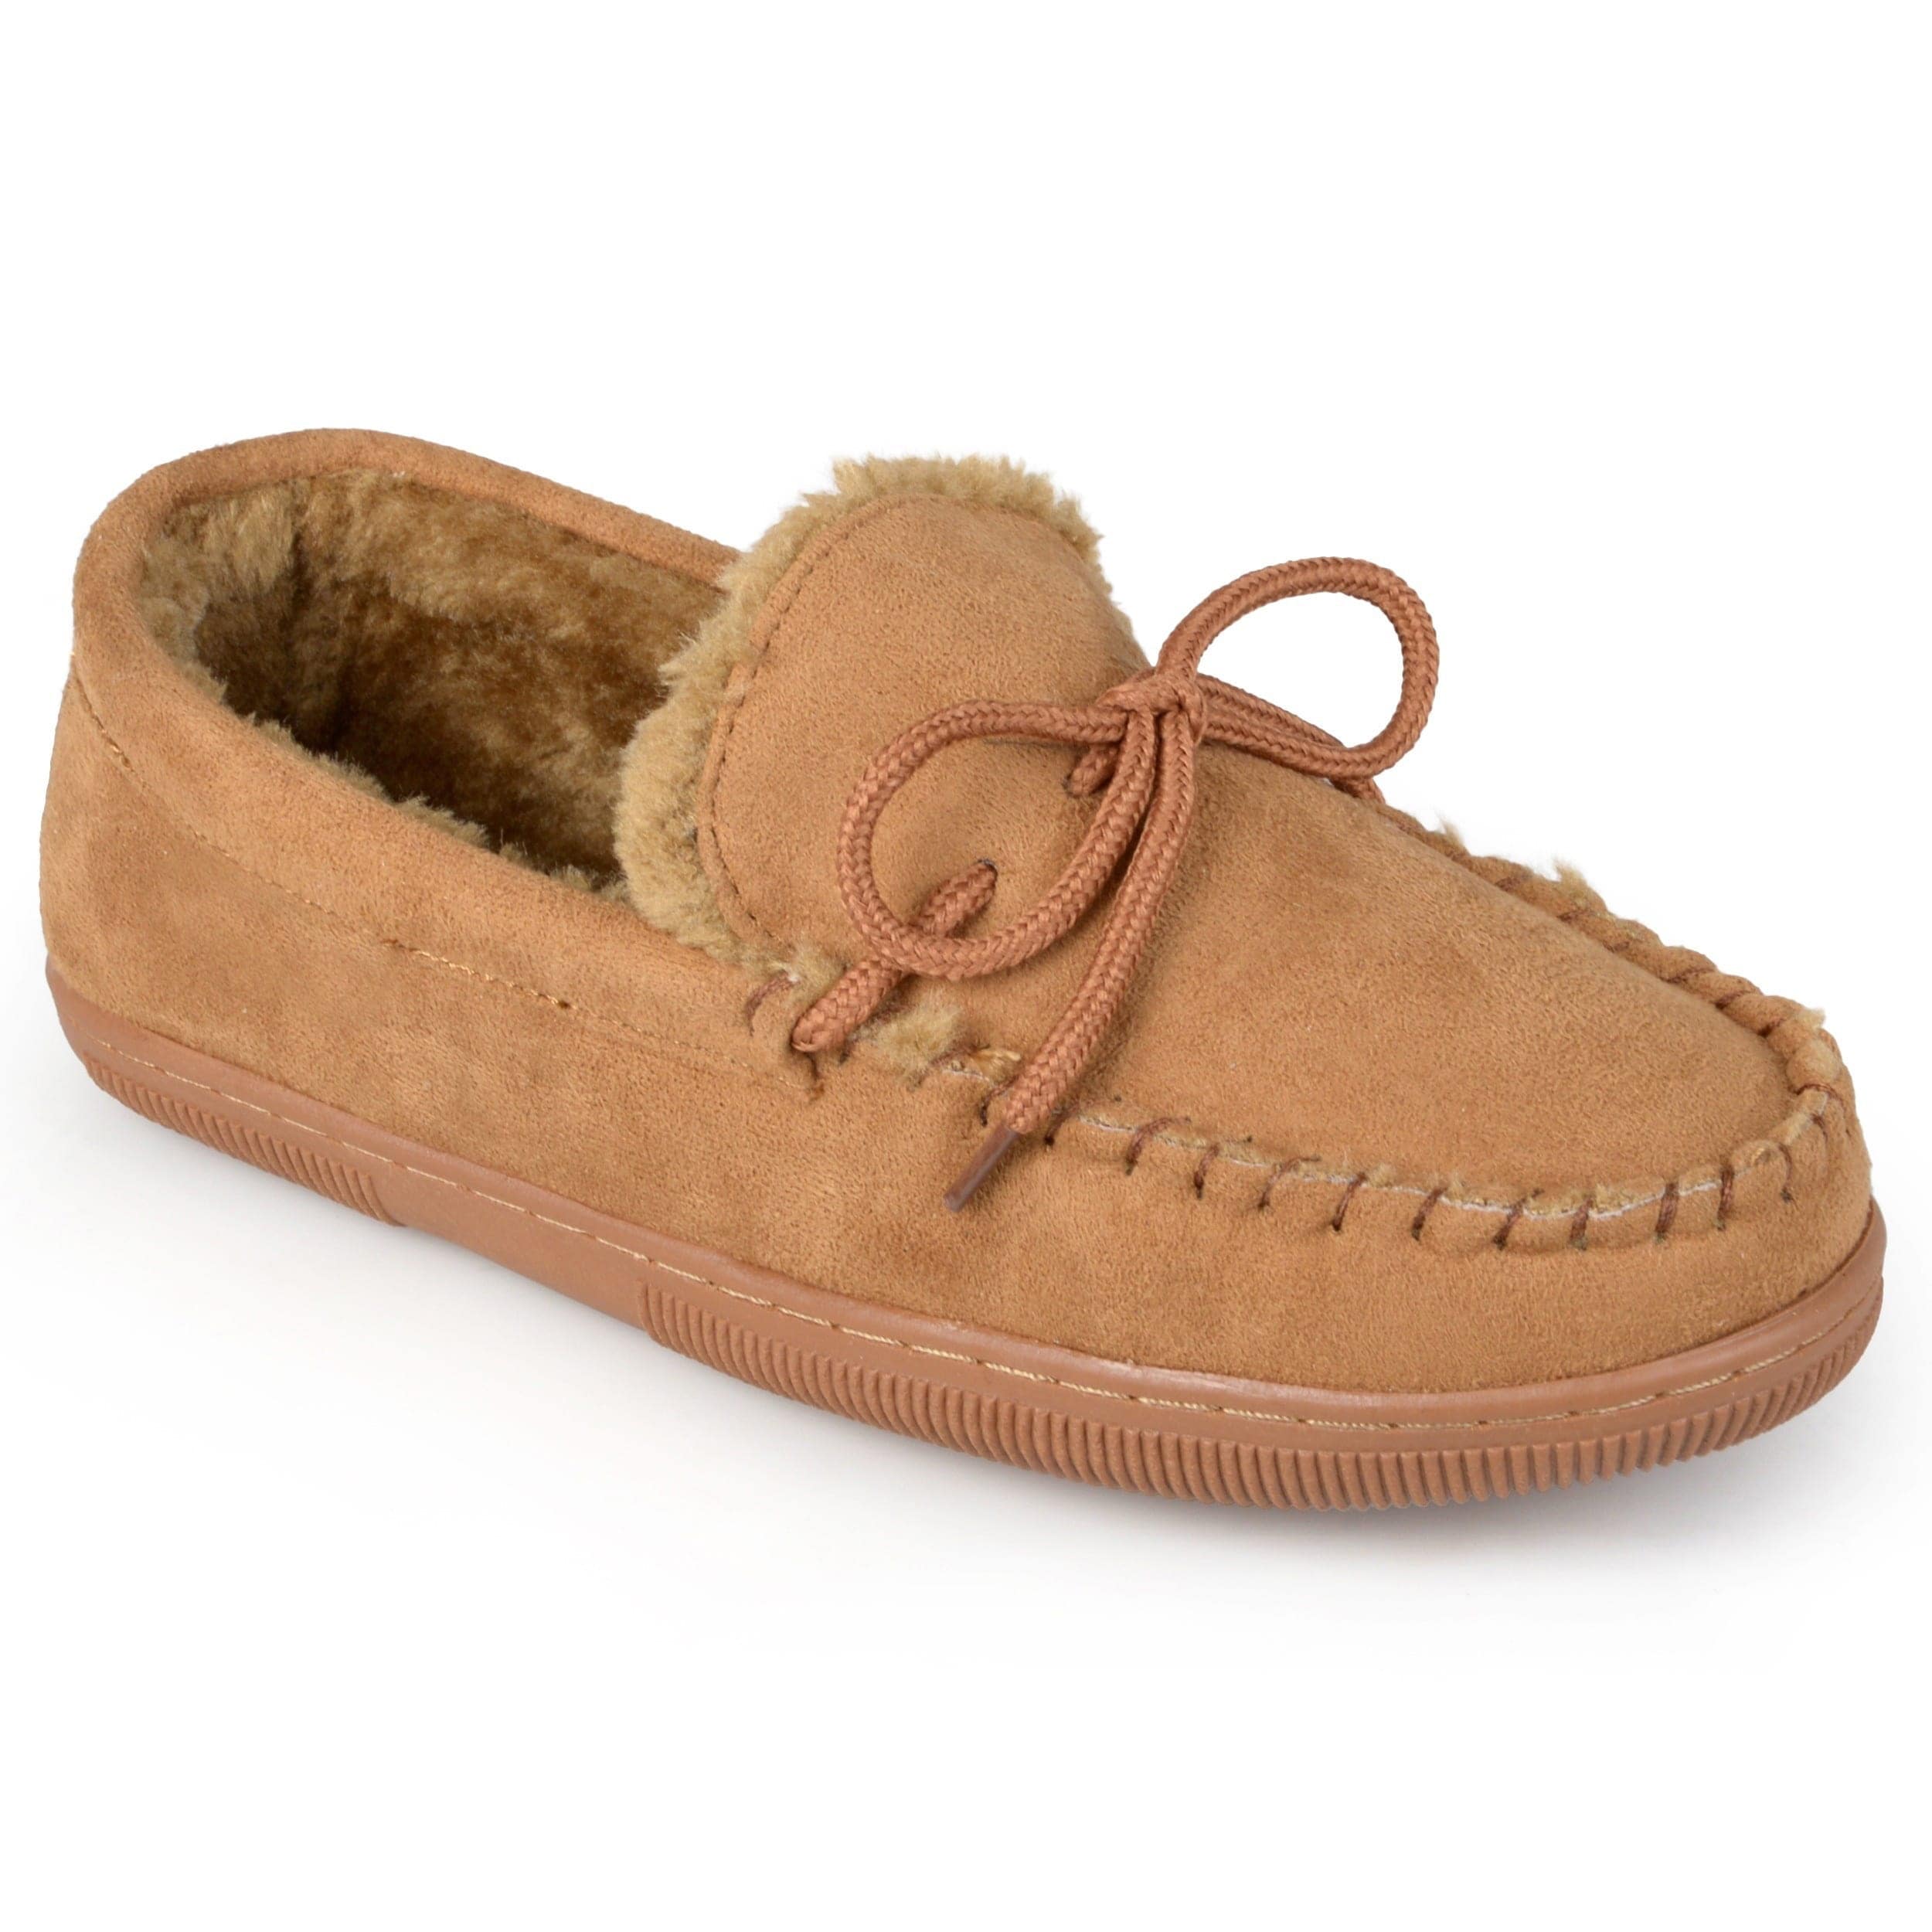 moccasin slippers